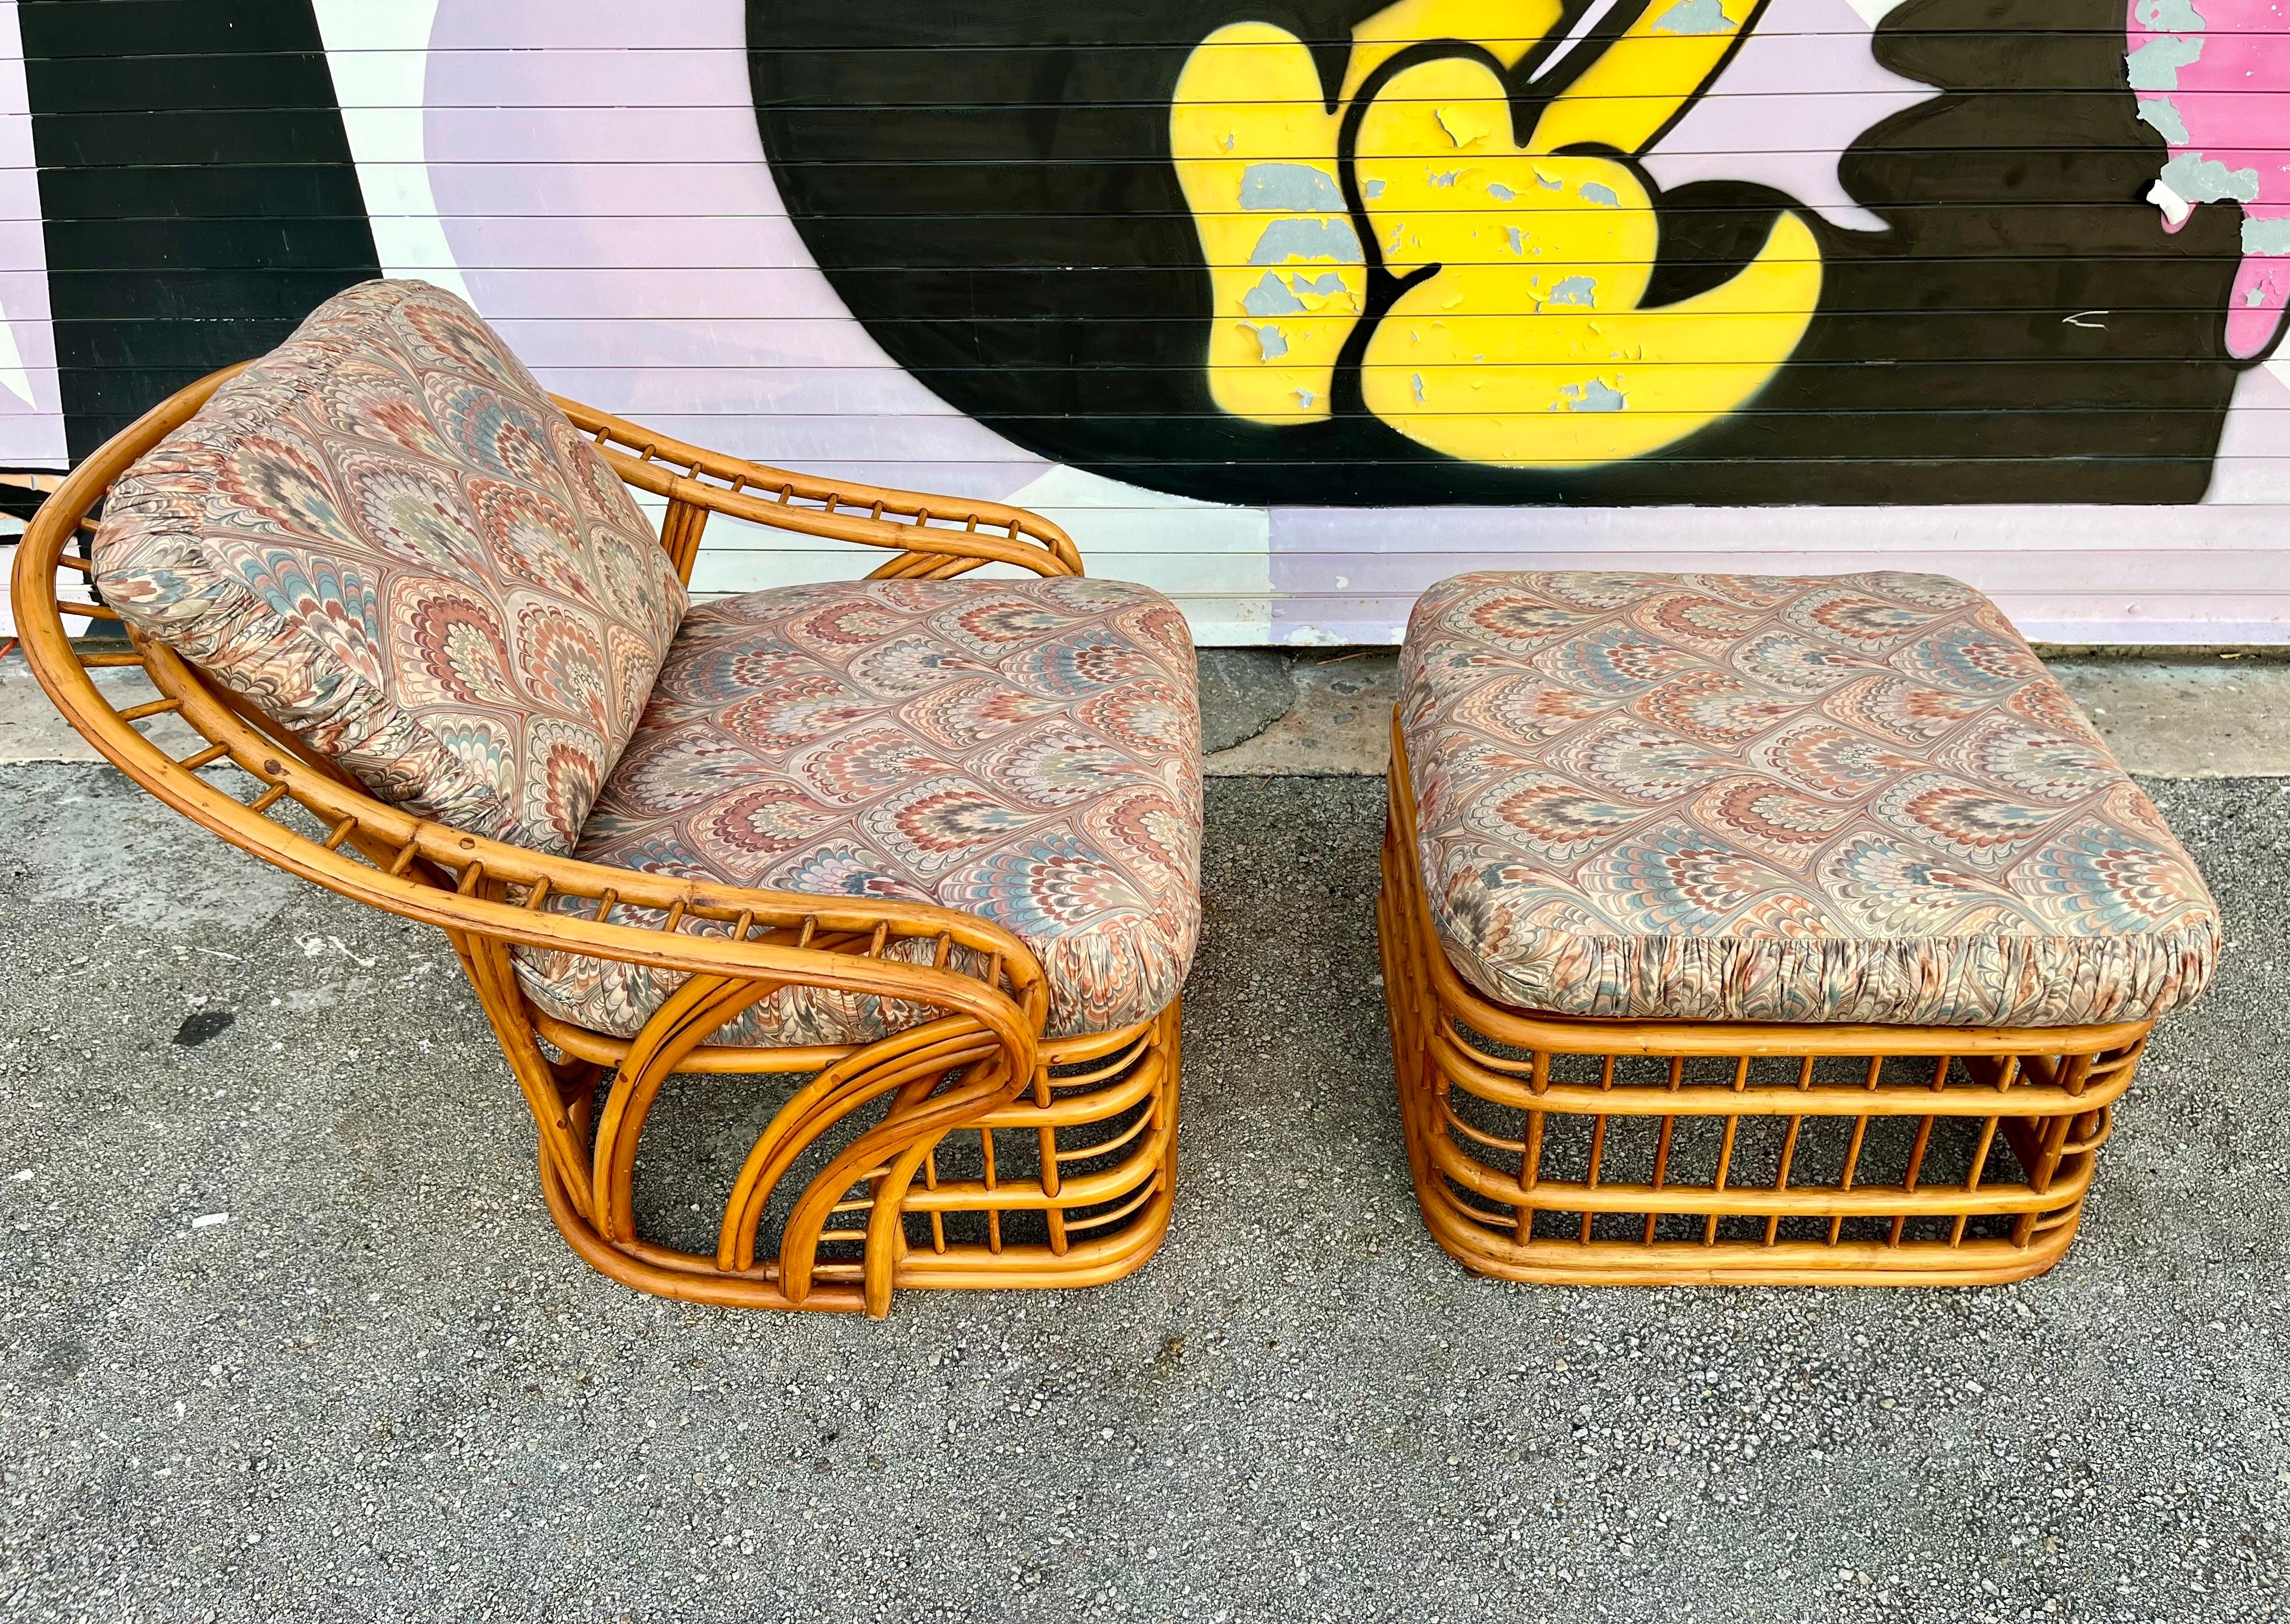 Coastal Style Rattan Lounge Chair and Ottoman Set by Whitecraft Rattan. C 1970s  In Good Condition For Sale In Miami, FL